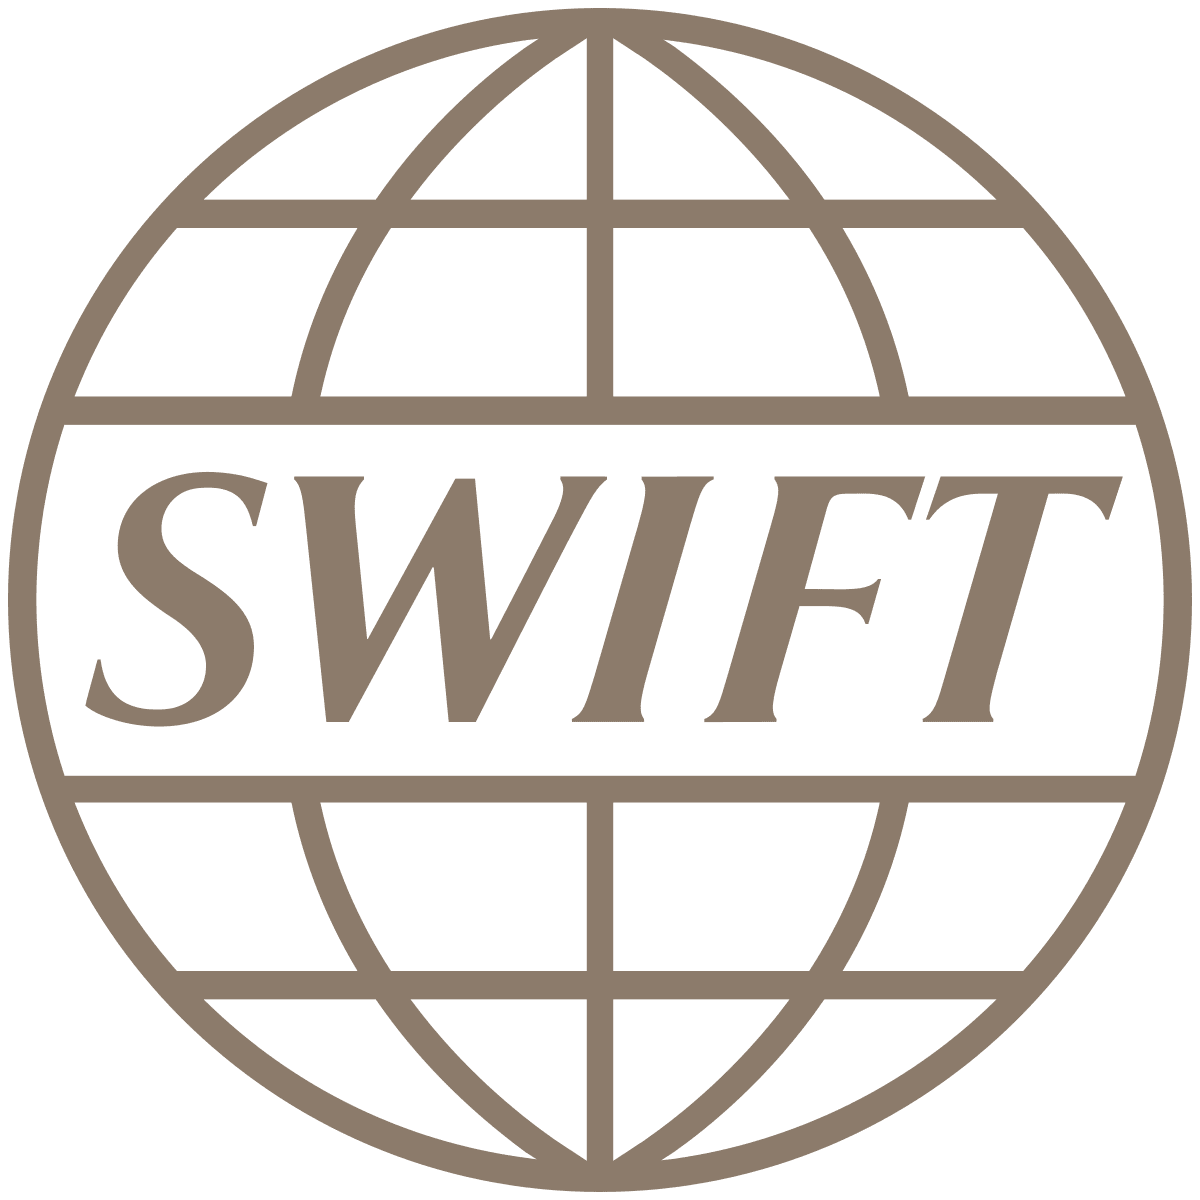 Caporaso & Partners offers application processing for SWIFT numbers